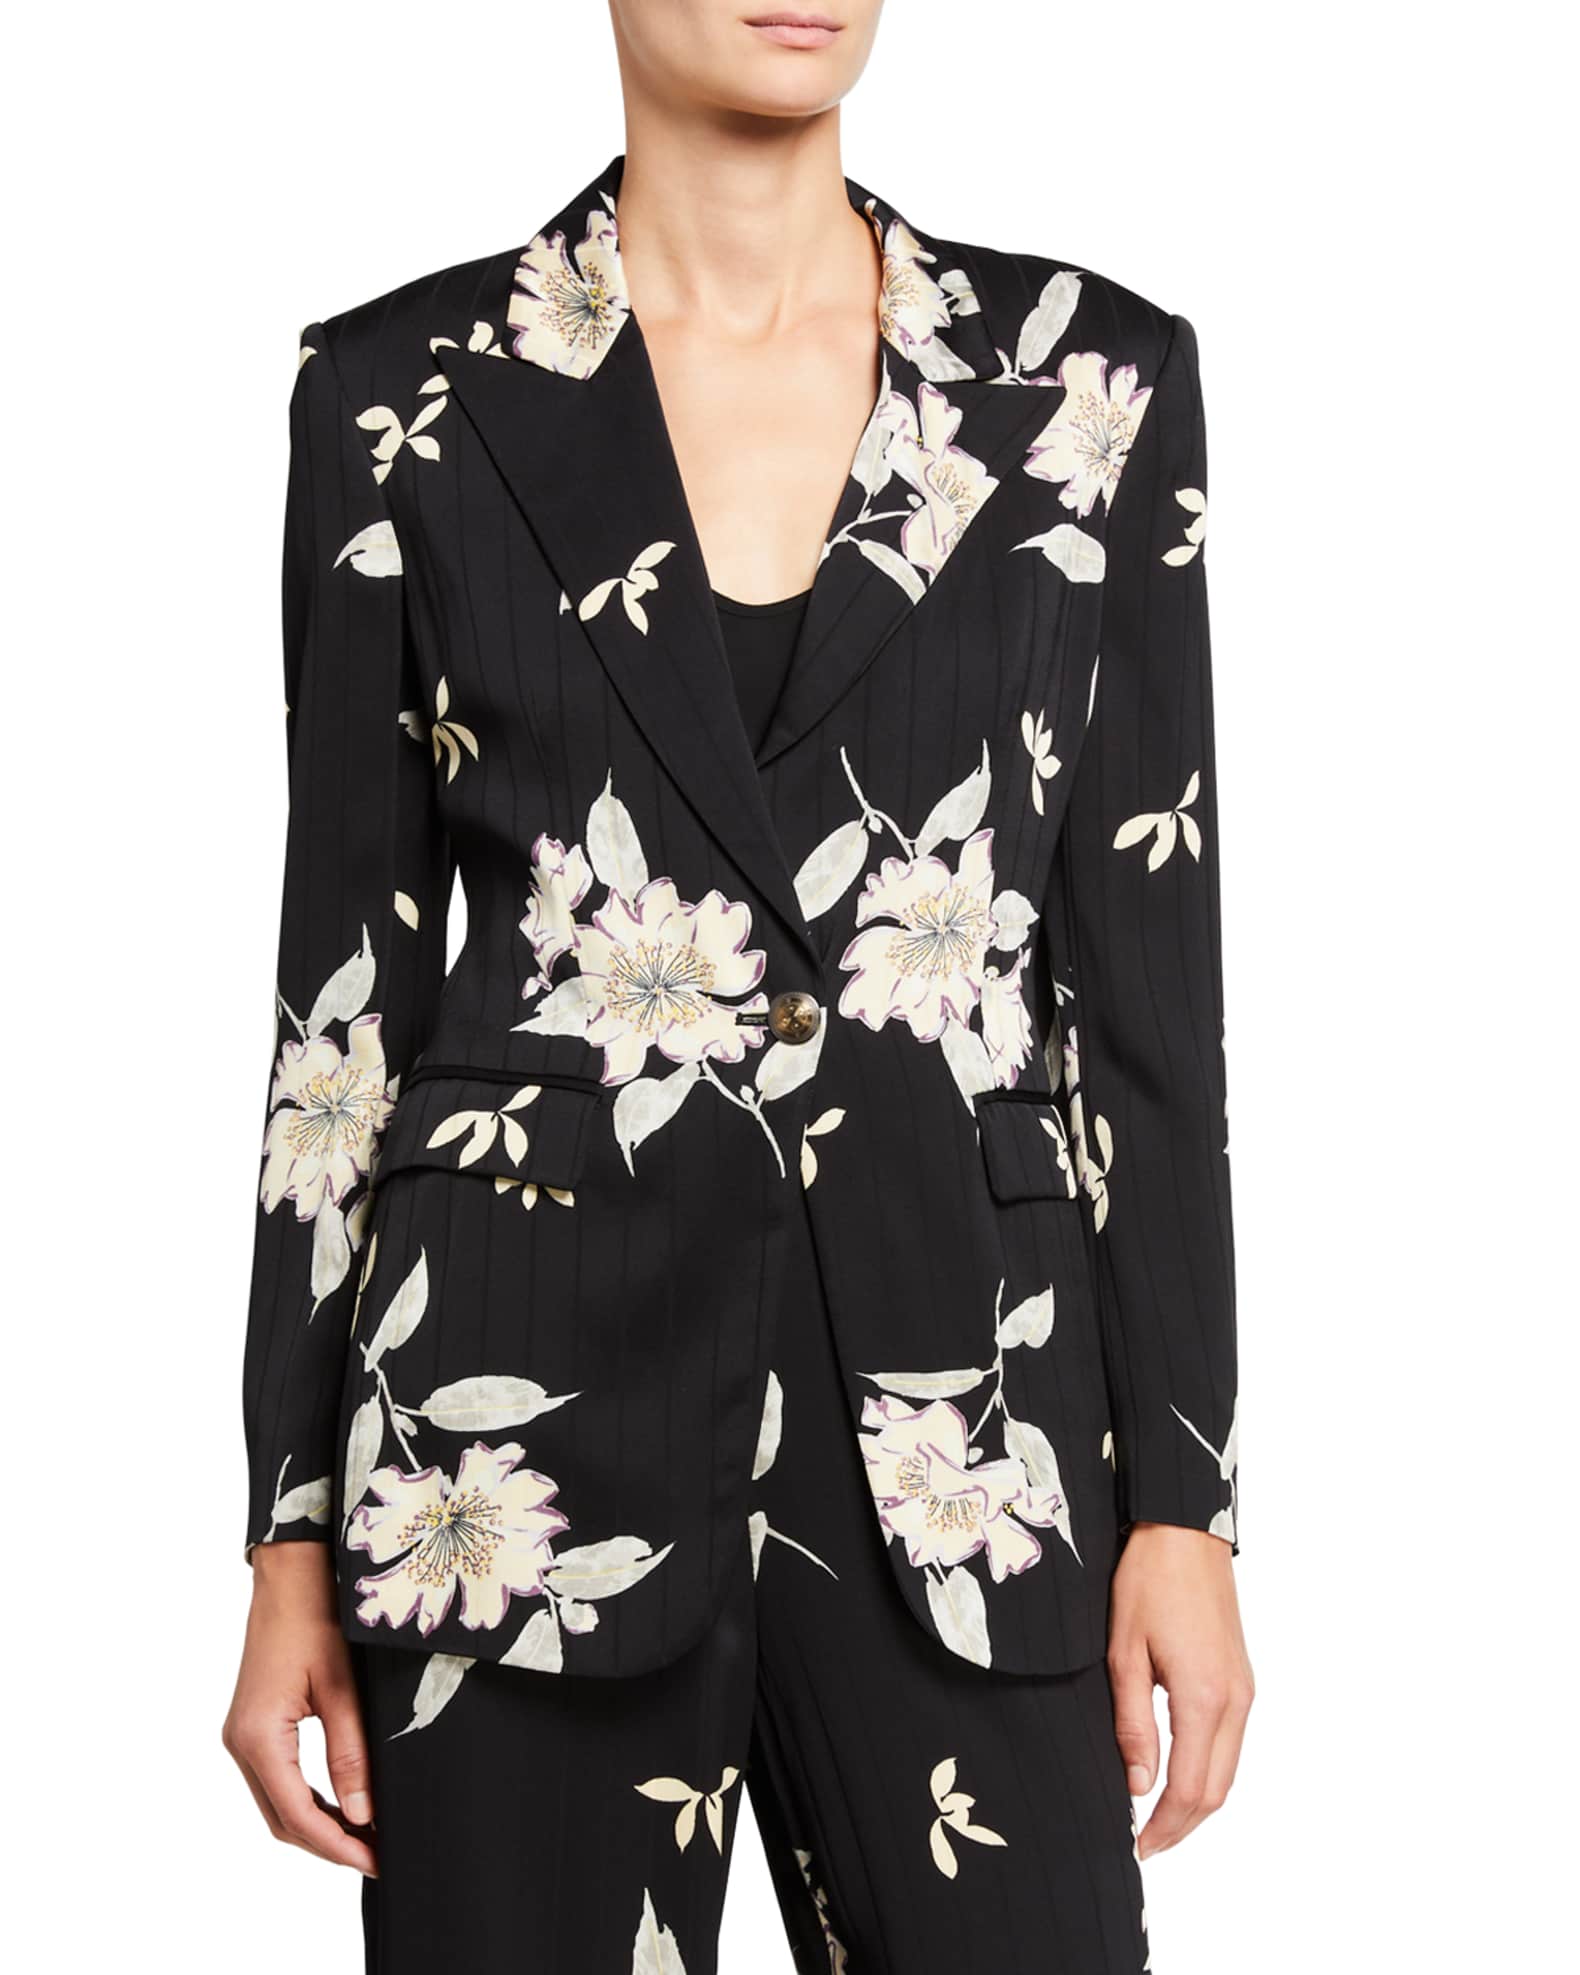 Spaced Plumeria Floral Print Pinstriped Blazer and Matching Items ...